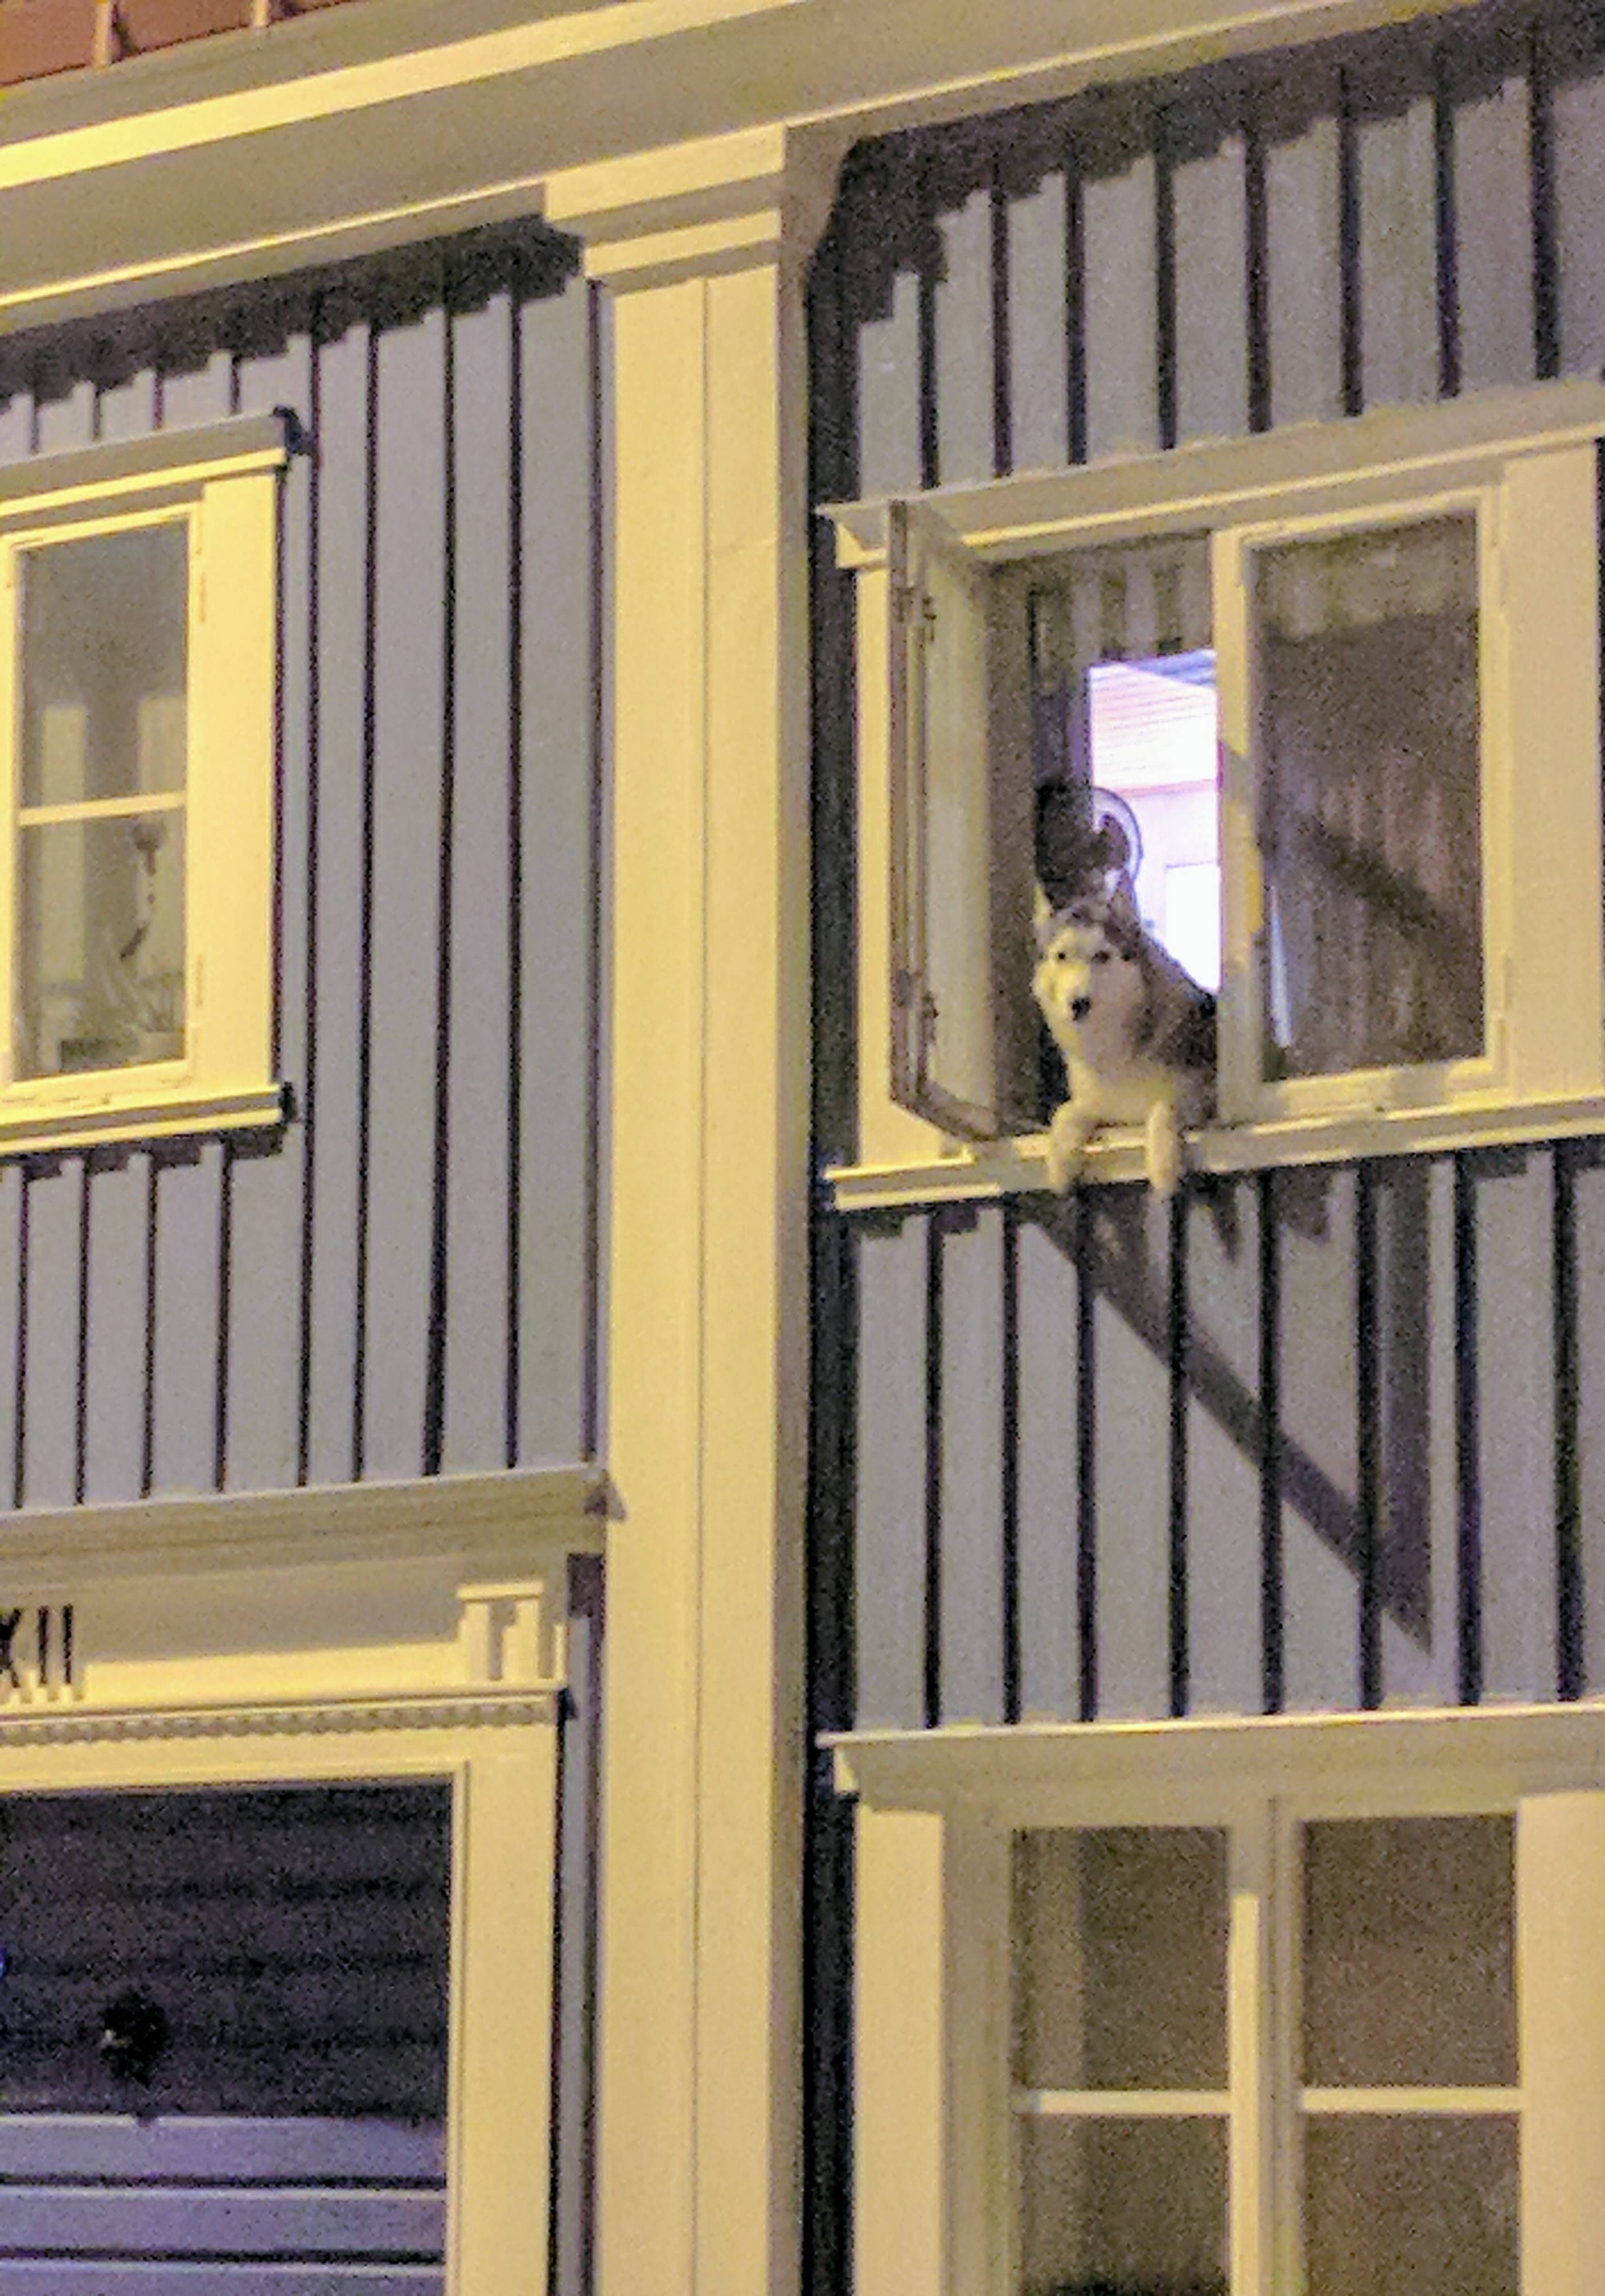 This adorable Husky hangs out in the window every night I walk home